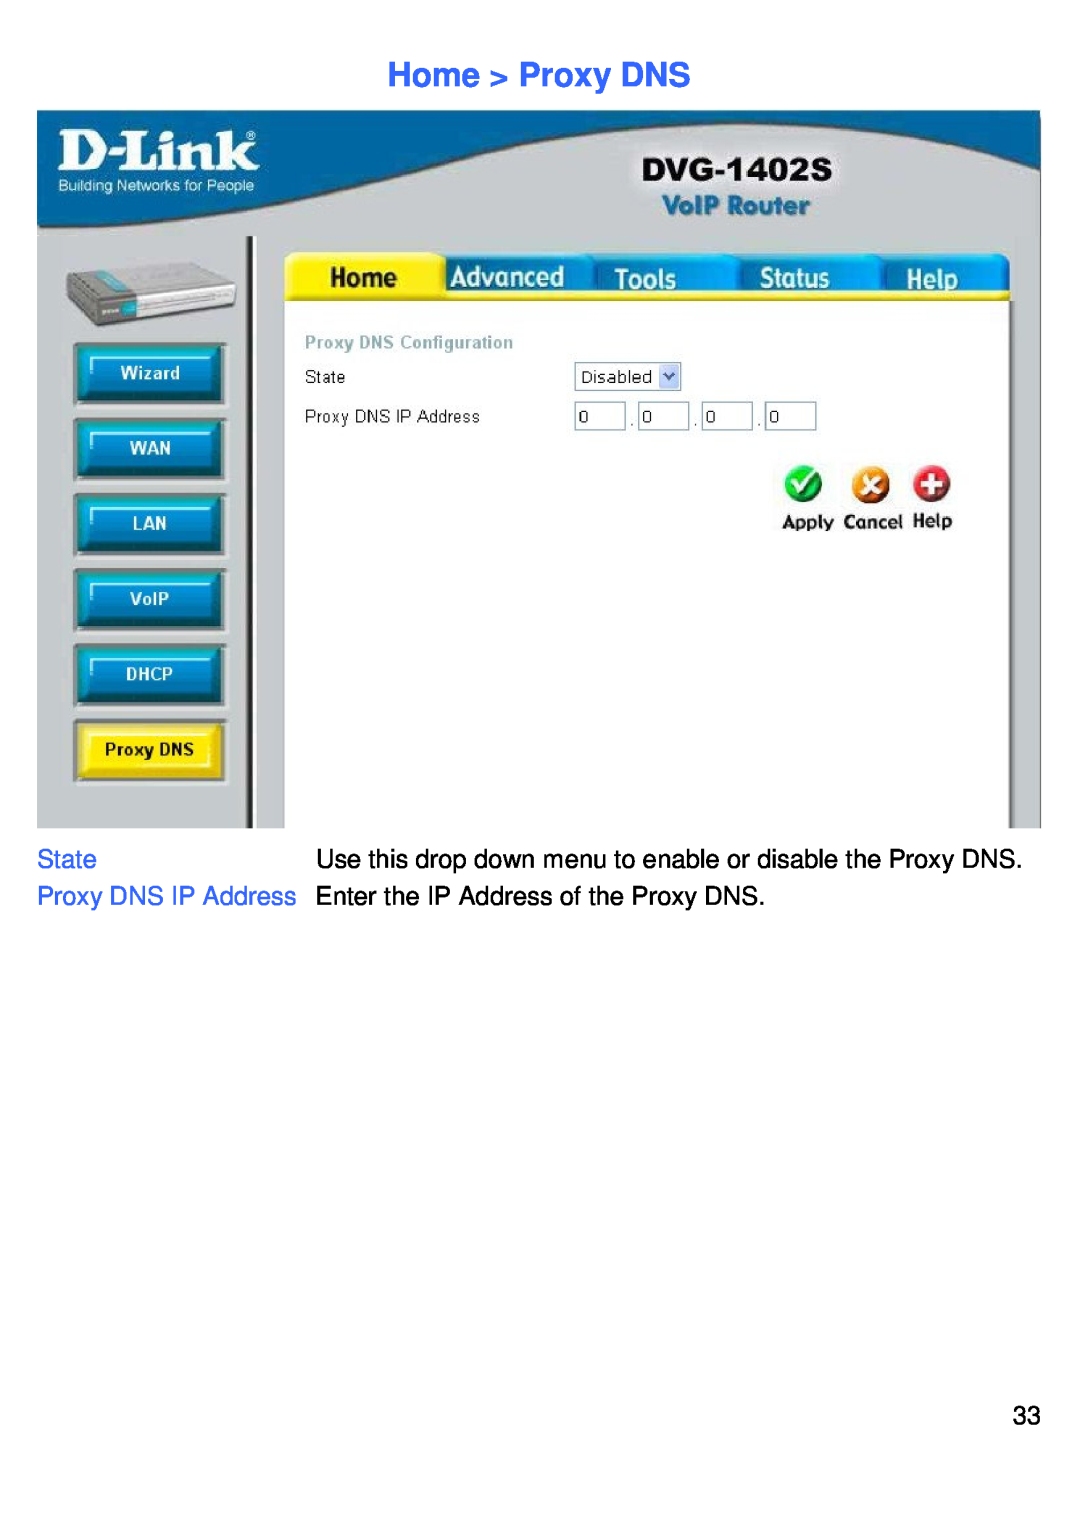 D-Link DVG-1402S Home Proxy DNS, State, Use this drop down menu to enable or disable the Proxy DNS, Proxy DNS IP Address 